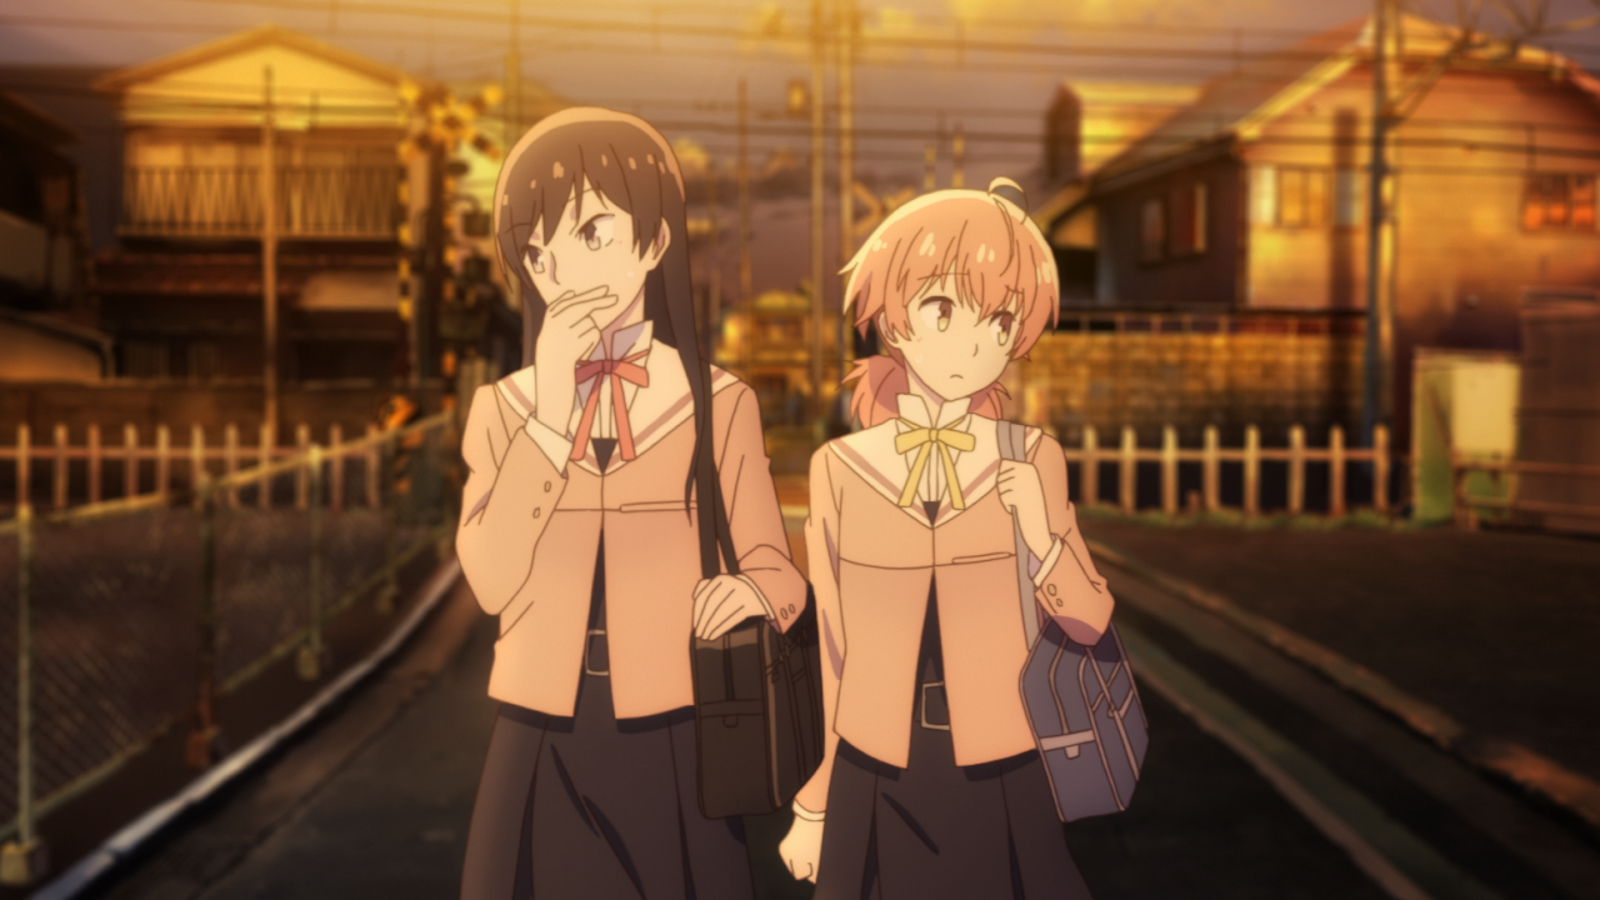 Bloom Into You - Volume 1: Episode 01-04 [DVD] Image 9